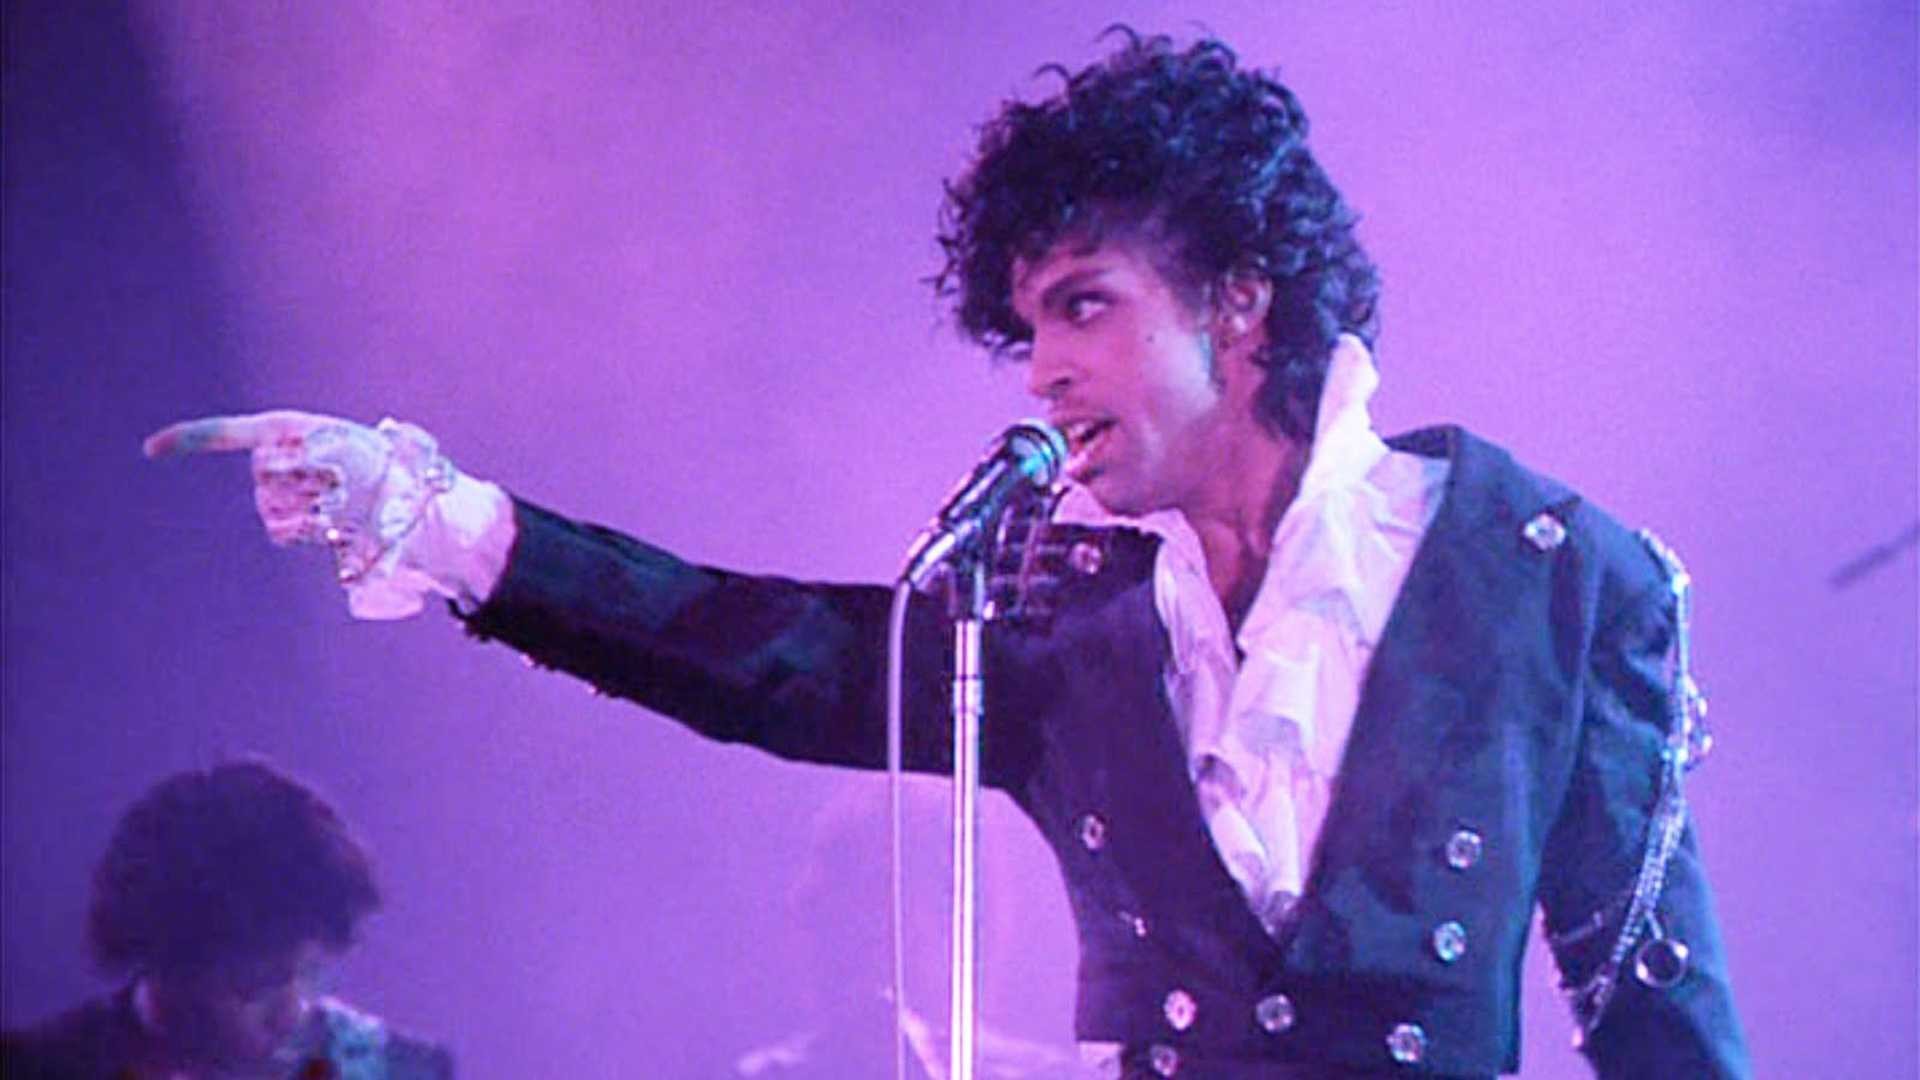 1920x1080 The fascinating origin story of Prince's iconic symbol